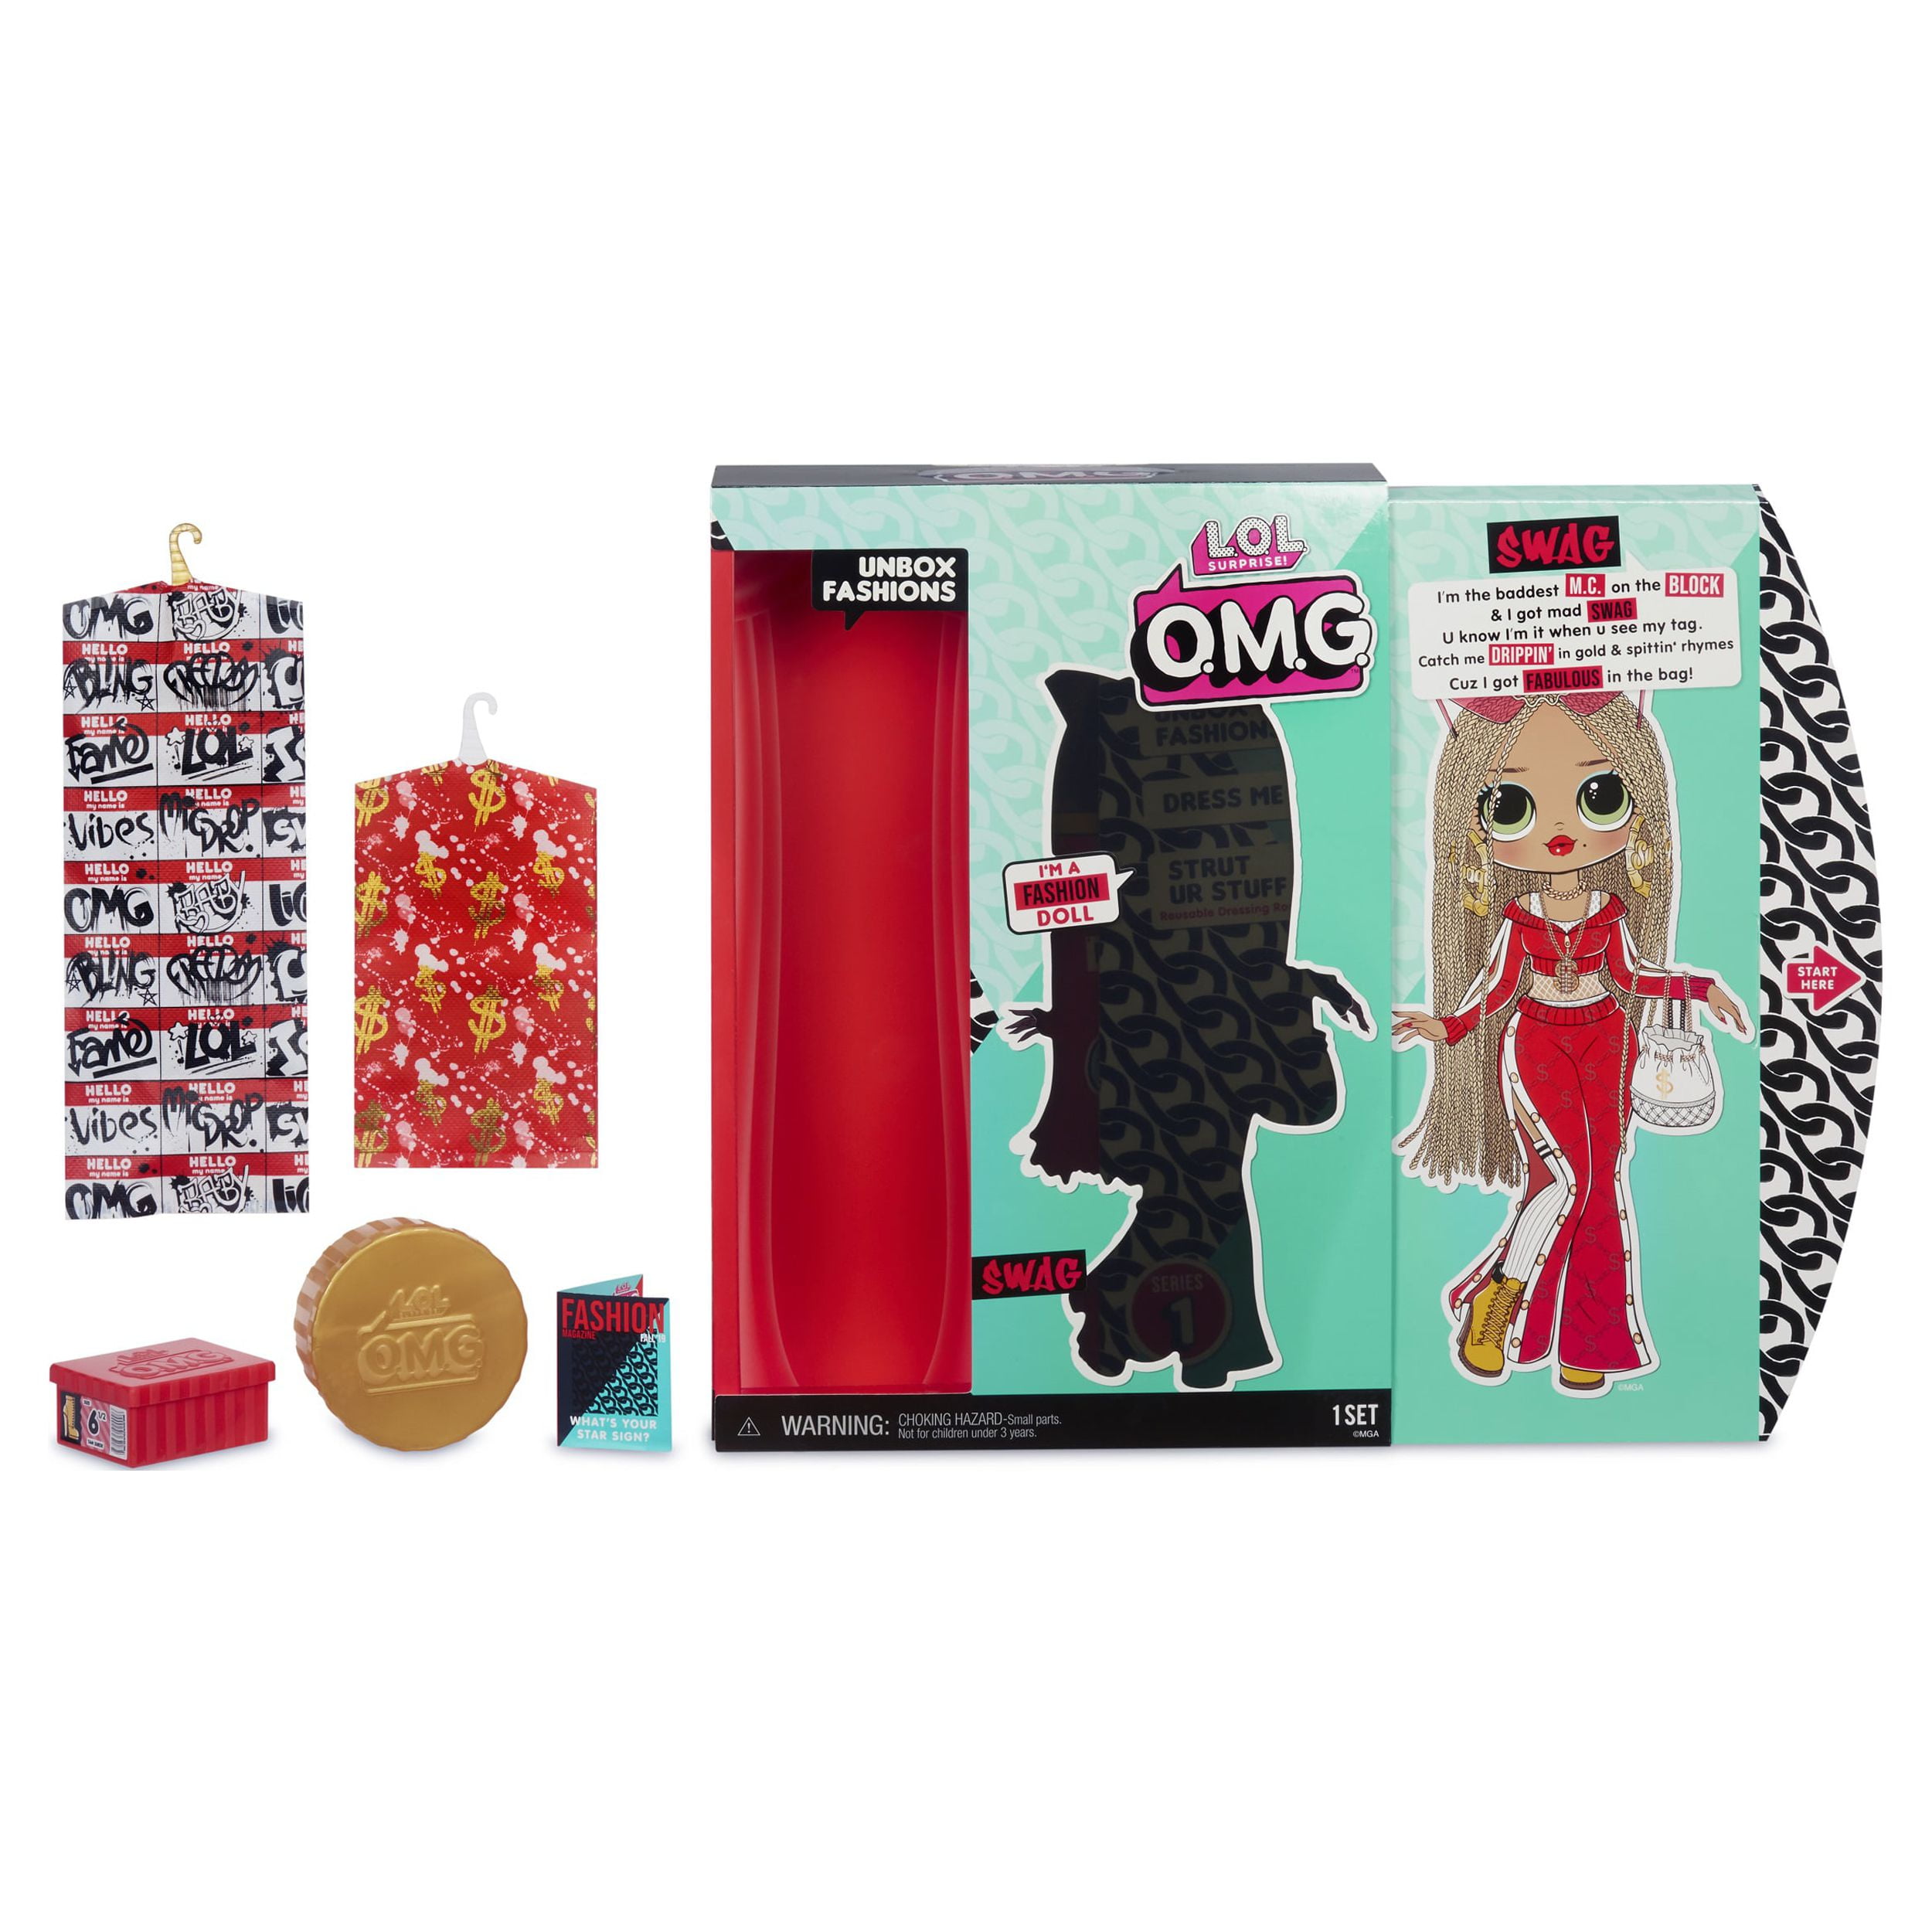 LOL Surprise OMG Swag Fashion Doll– Great Gift for Kids - OMG Swag